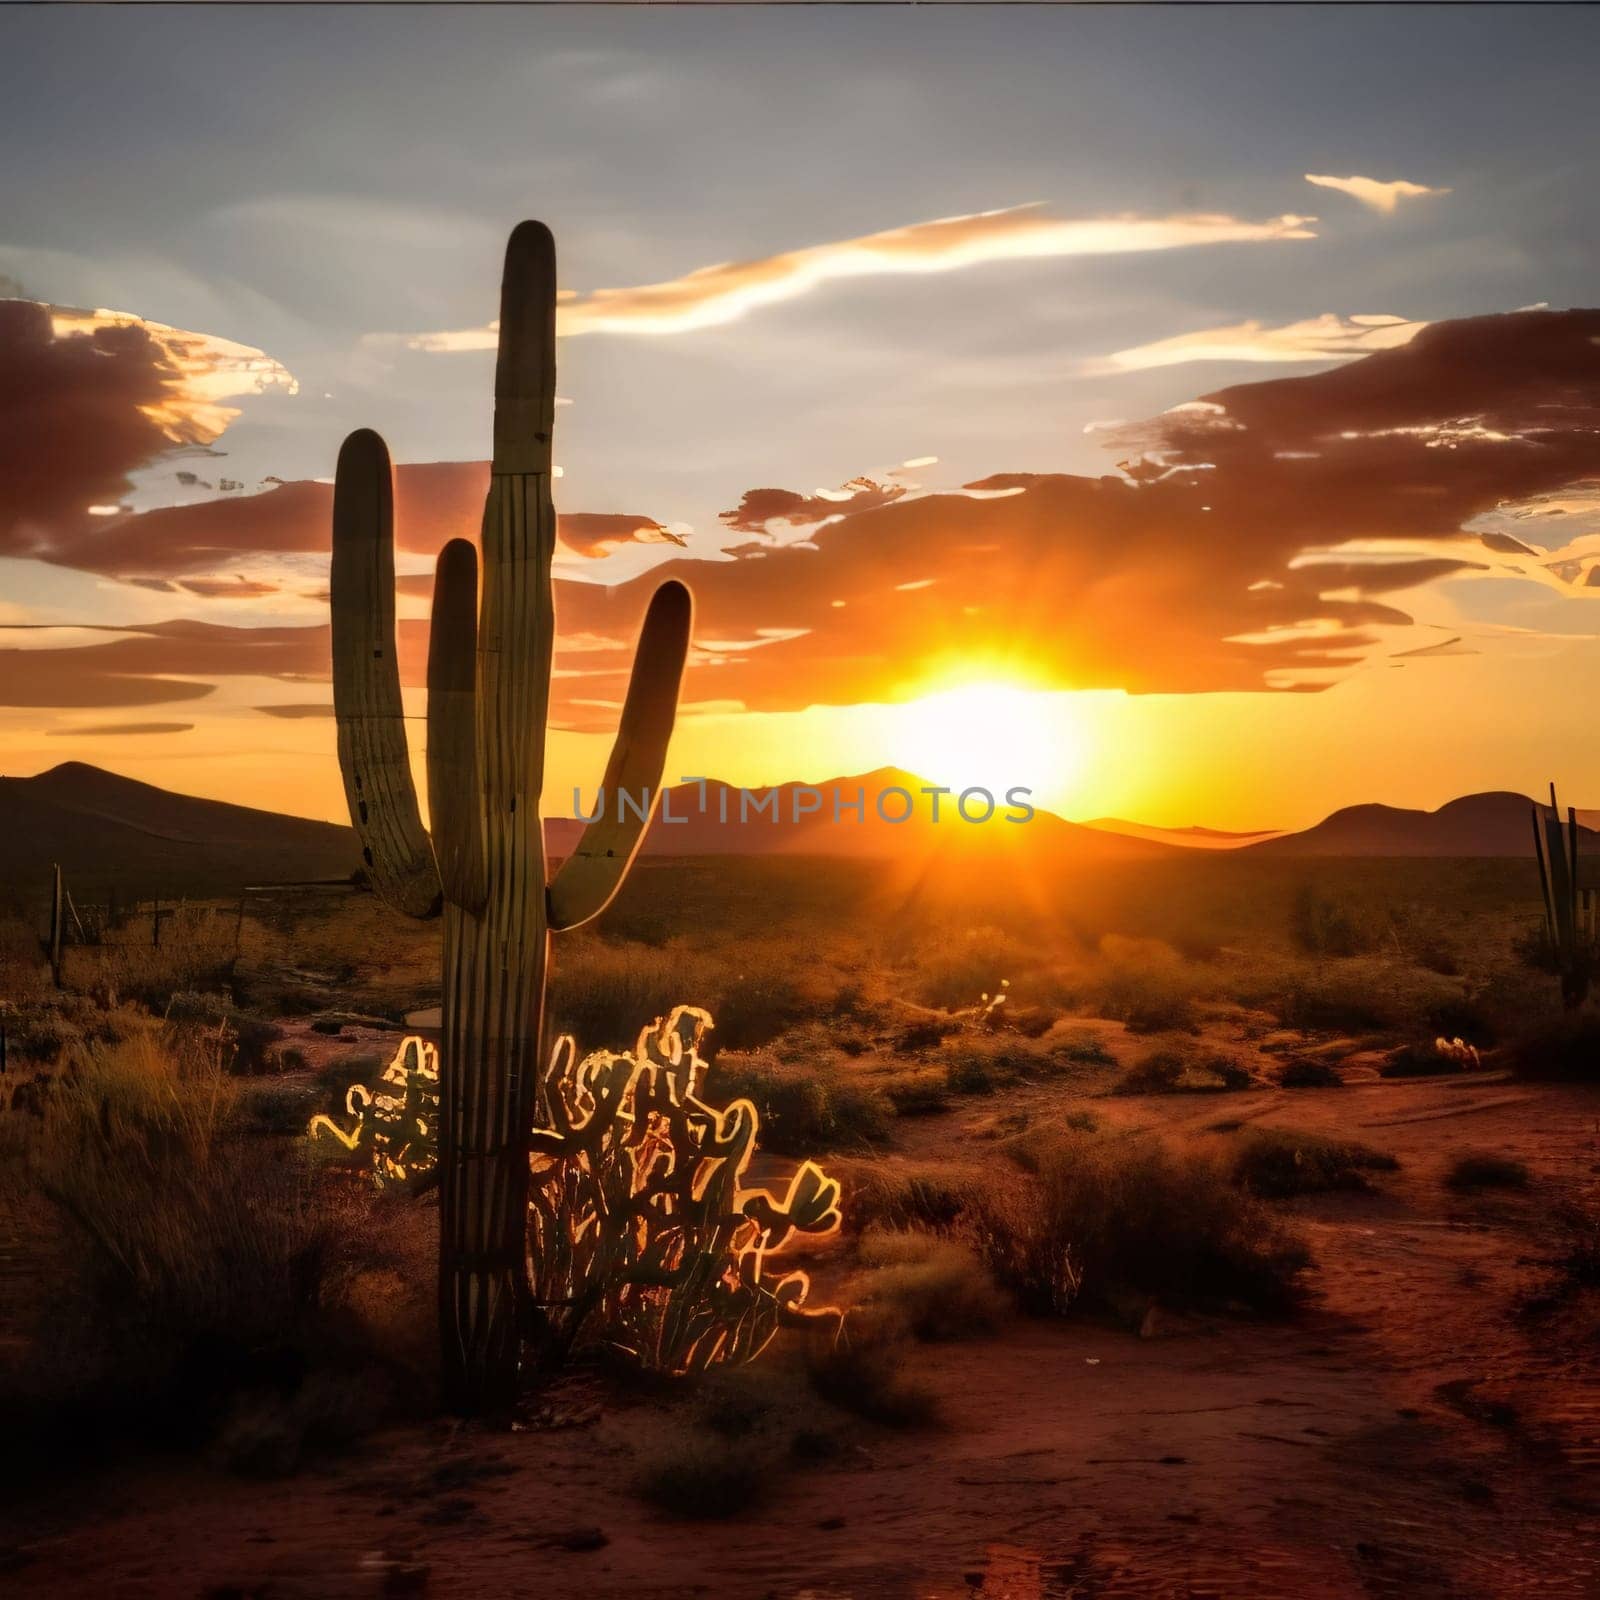 Plant called Cactus: Cactus against the background of the setting sun in the desert.